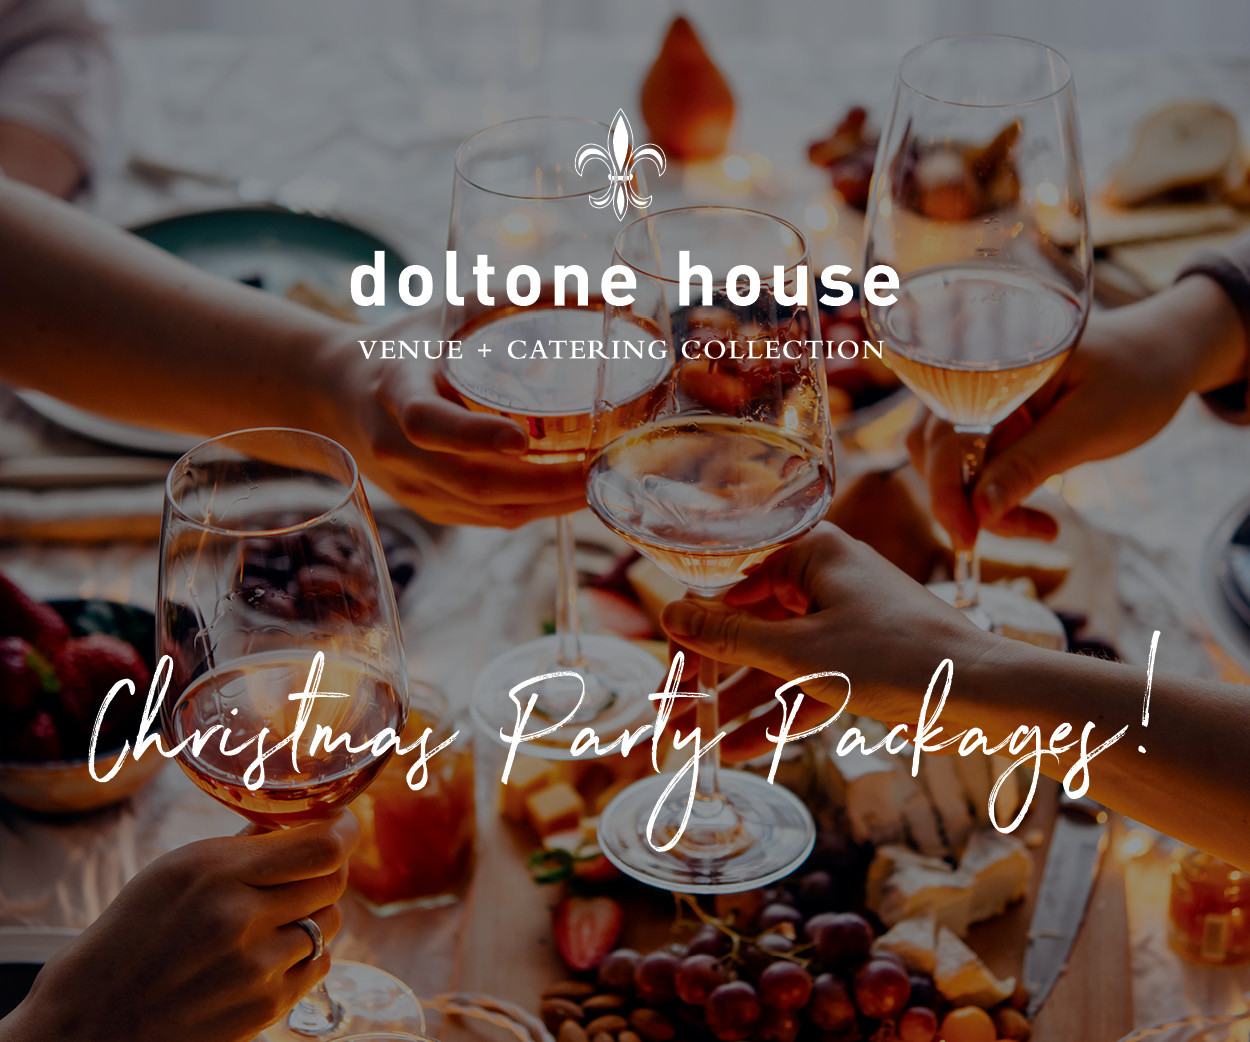 Christmas Party Ideas Sydney
 12 Work Christmas Party Ideas in Sydney by Doltone House